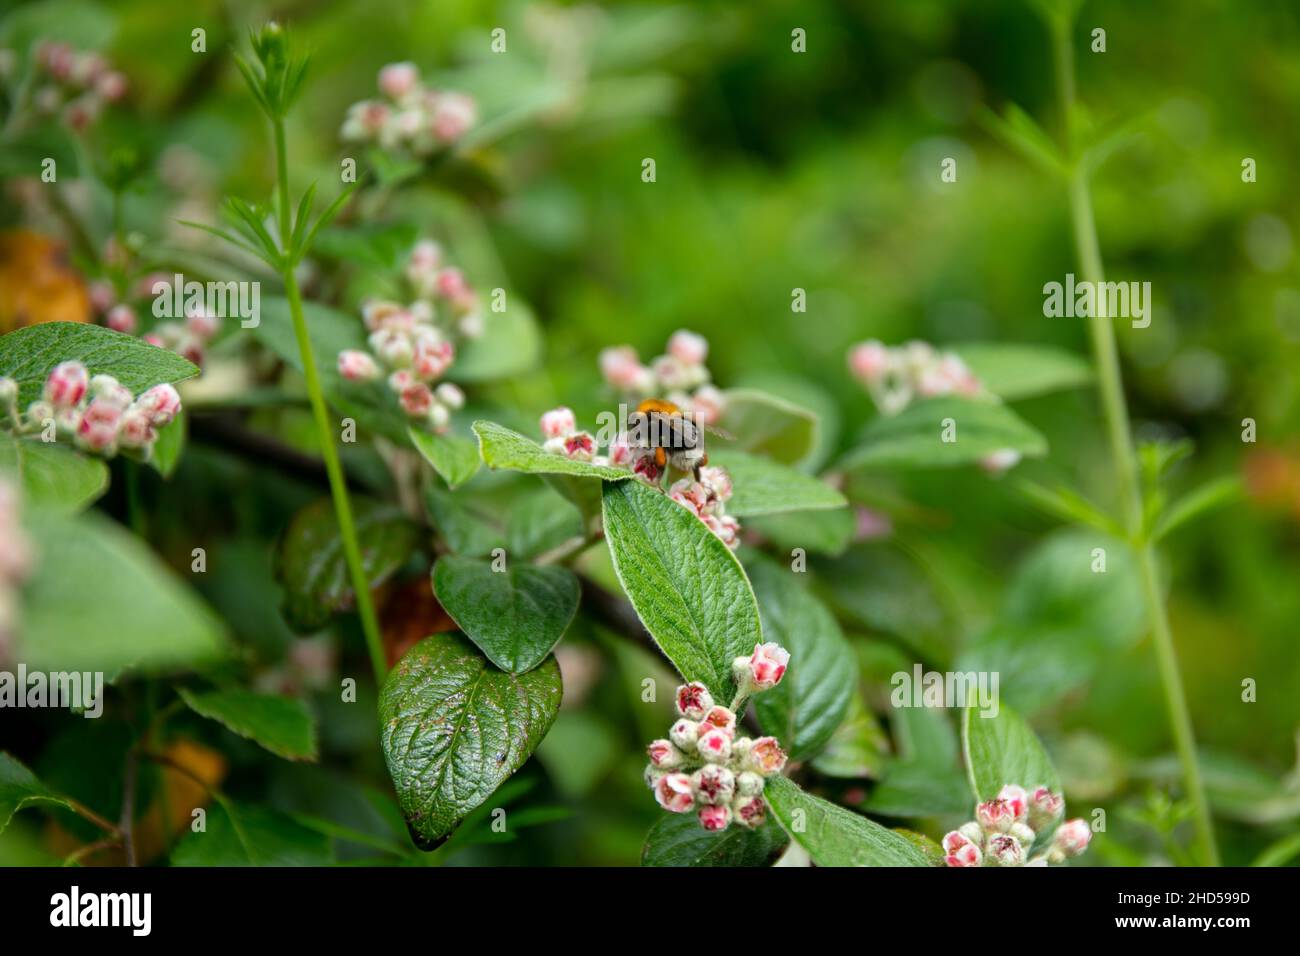 a bumblebee taking nectar from white little flowers and green leaves of Cotoneaster franchetii Bois Stock Photo